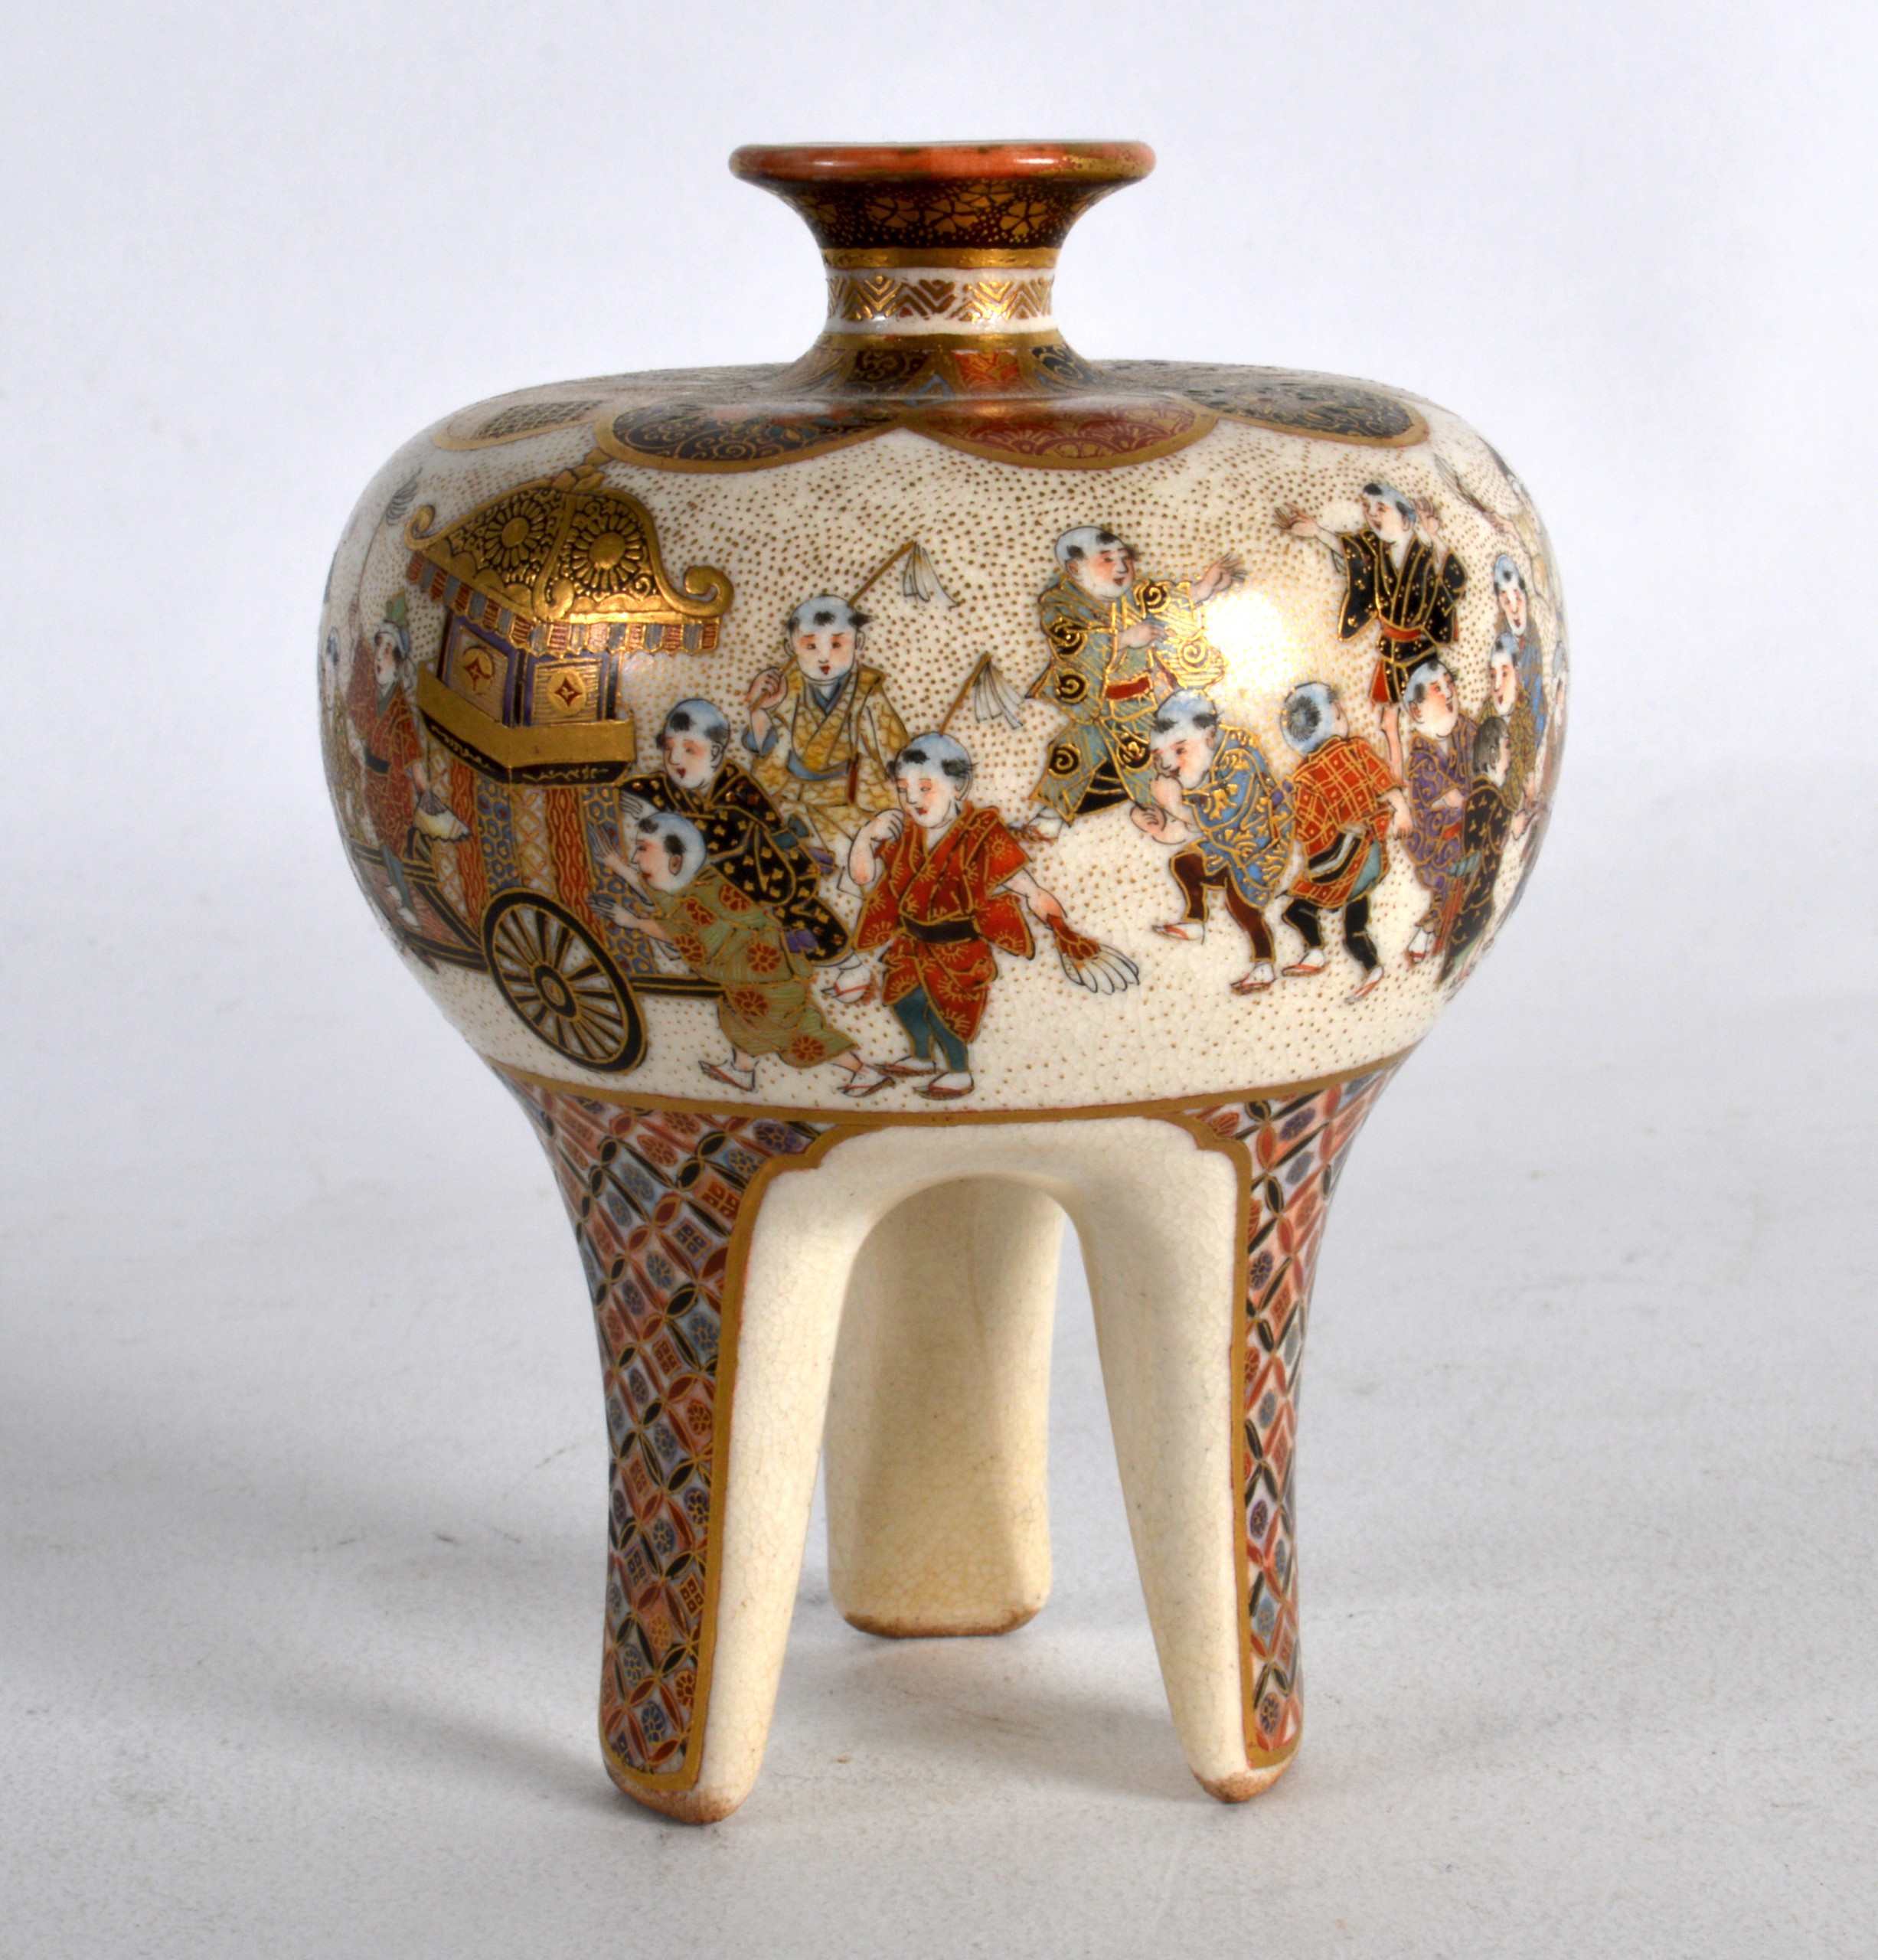 A GOOD SMALL LATE 19TH CENTURY JAPANESE MEIJI PERIOD SATSUMA VASE of bulbous form, upon slender legs - Image 2 of 3